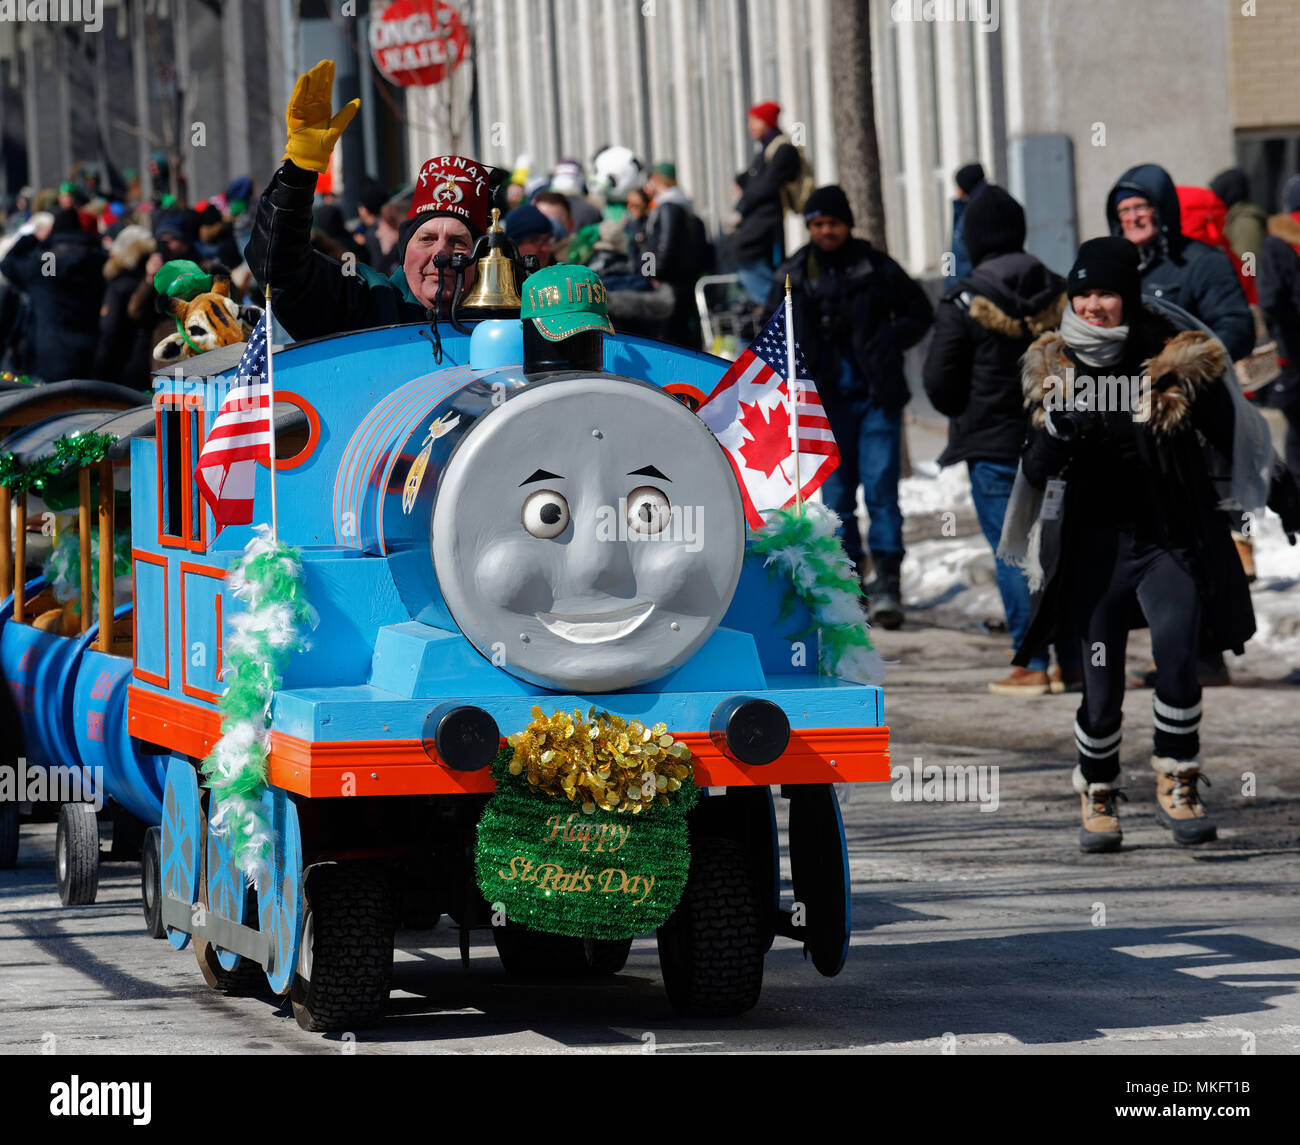 A Thomas the Tank engine float in the Montreal St Patrick's Day parade Stock Photo